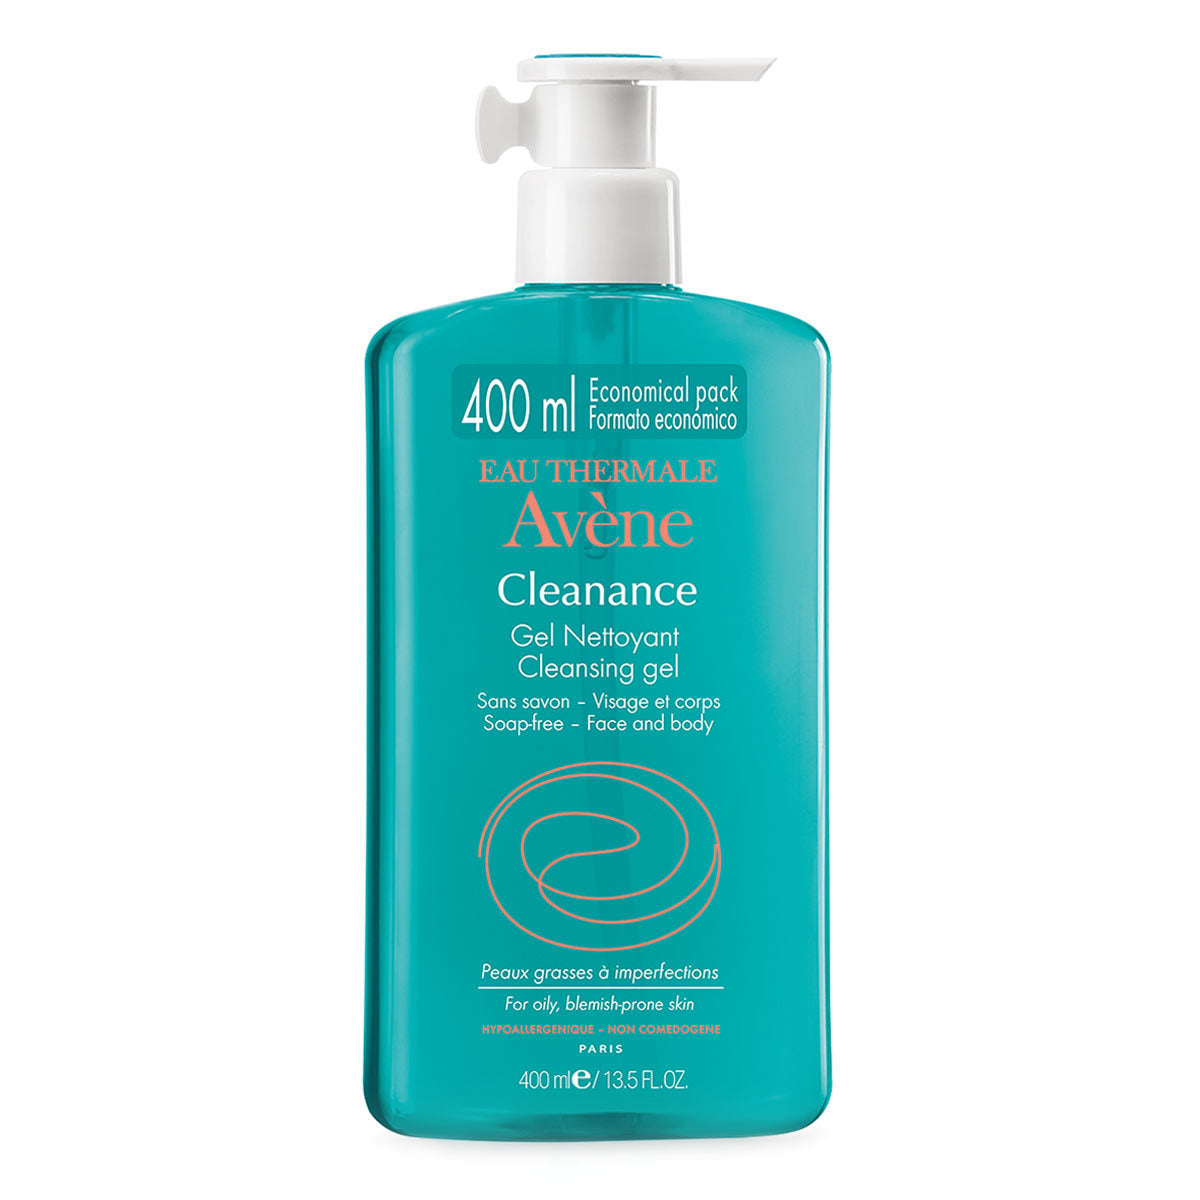 Primary image of Cleanance Cleansing Gel